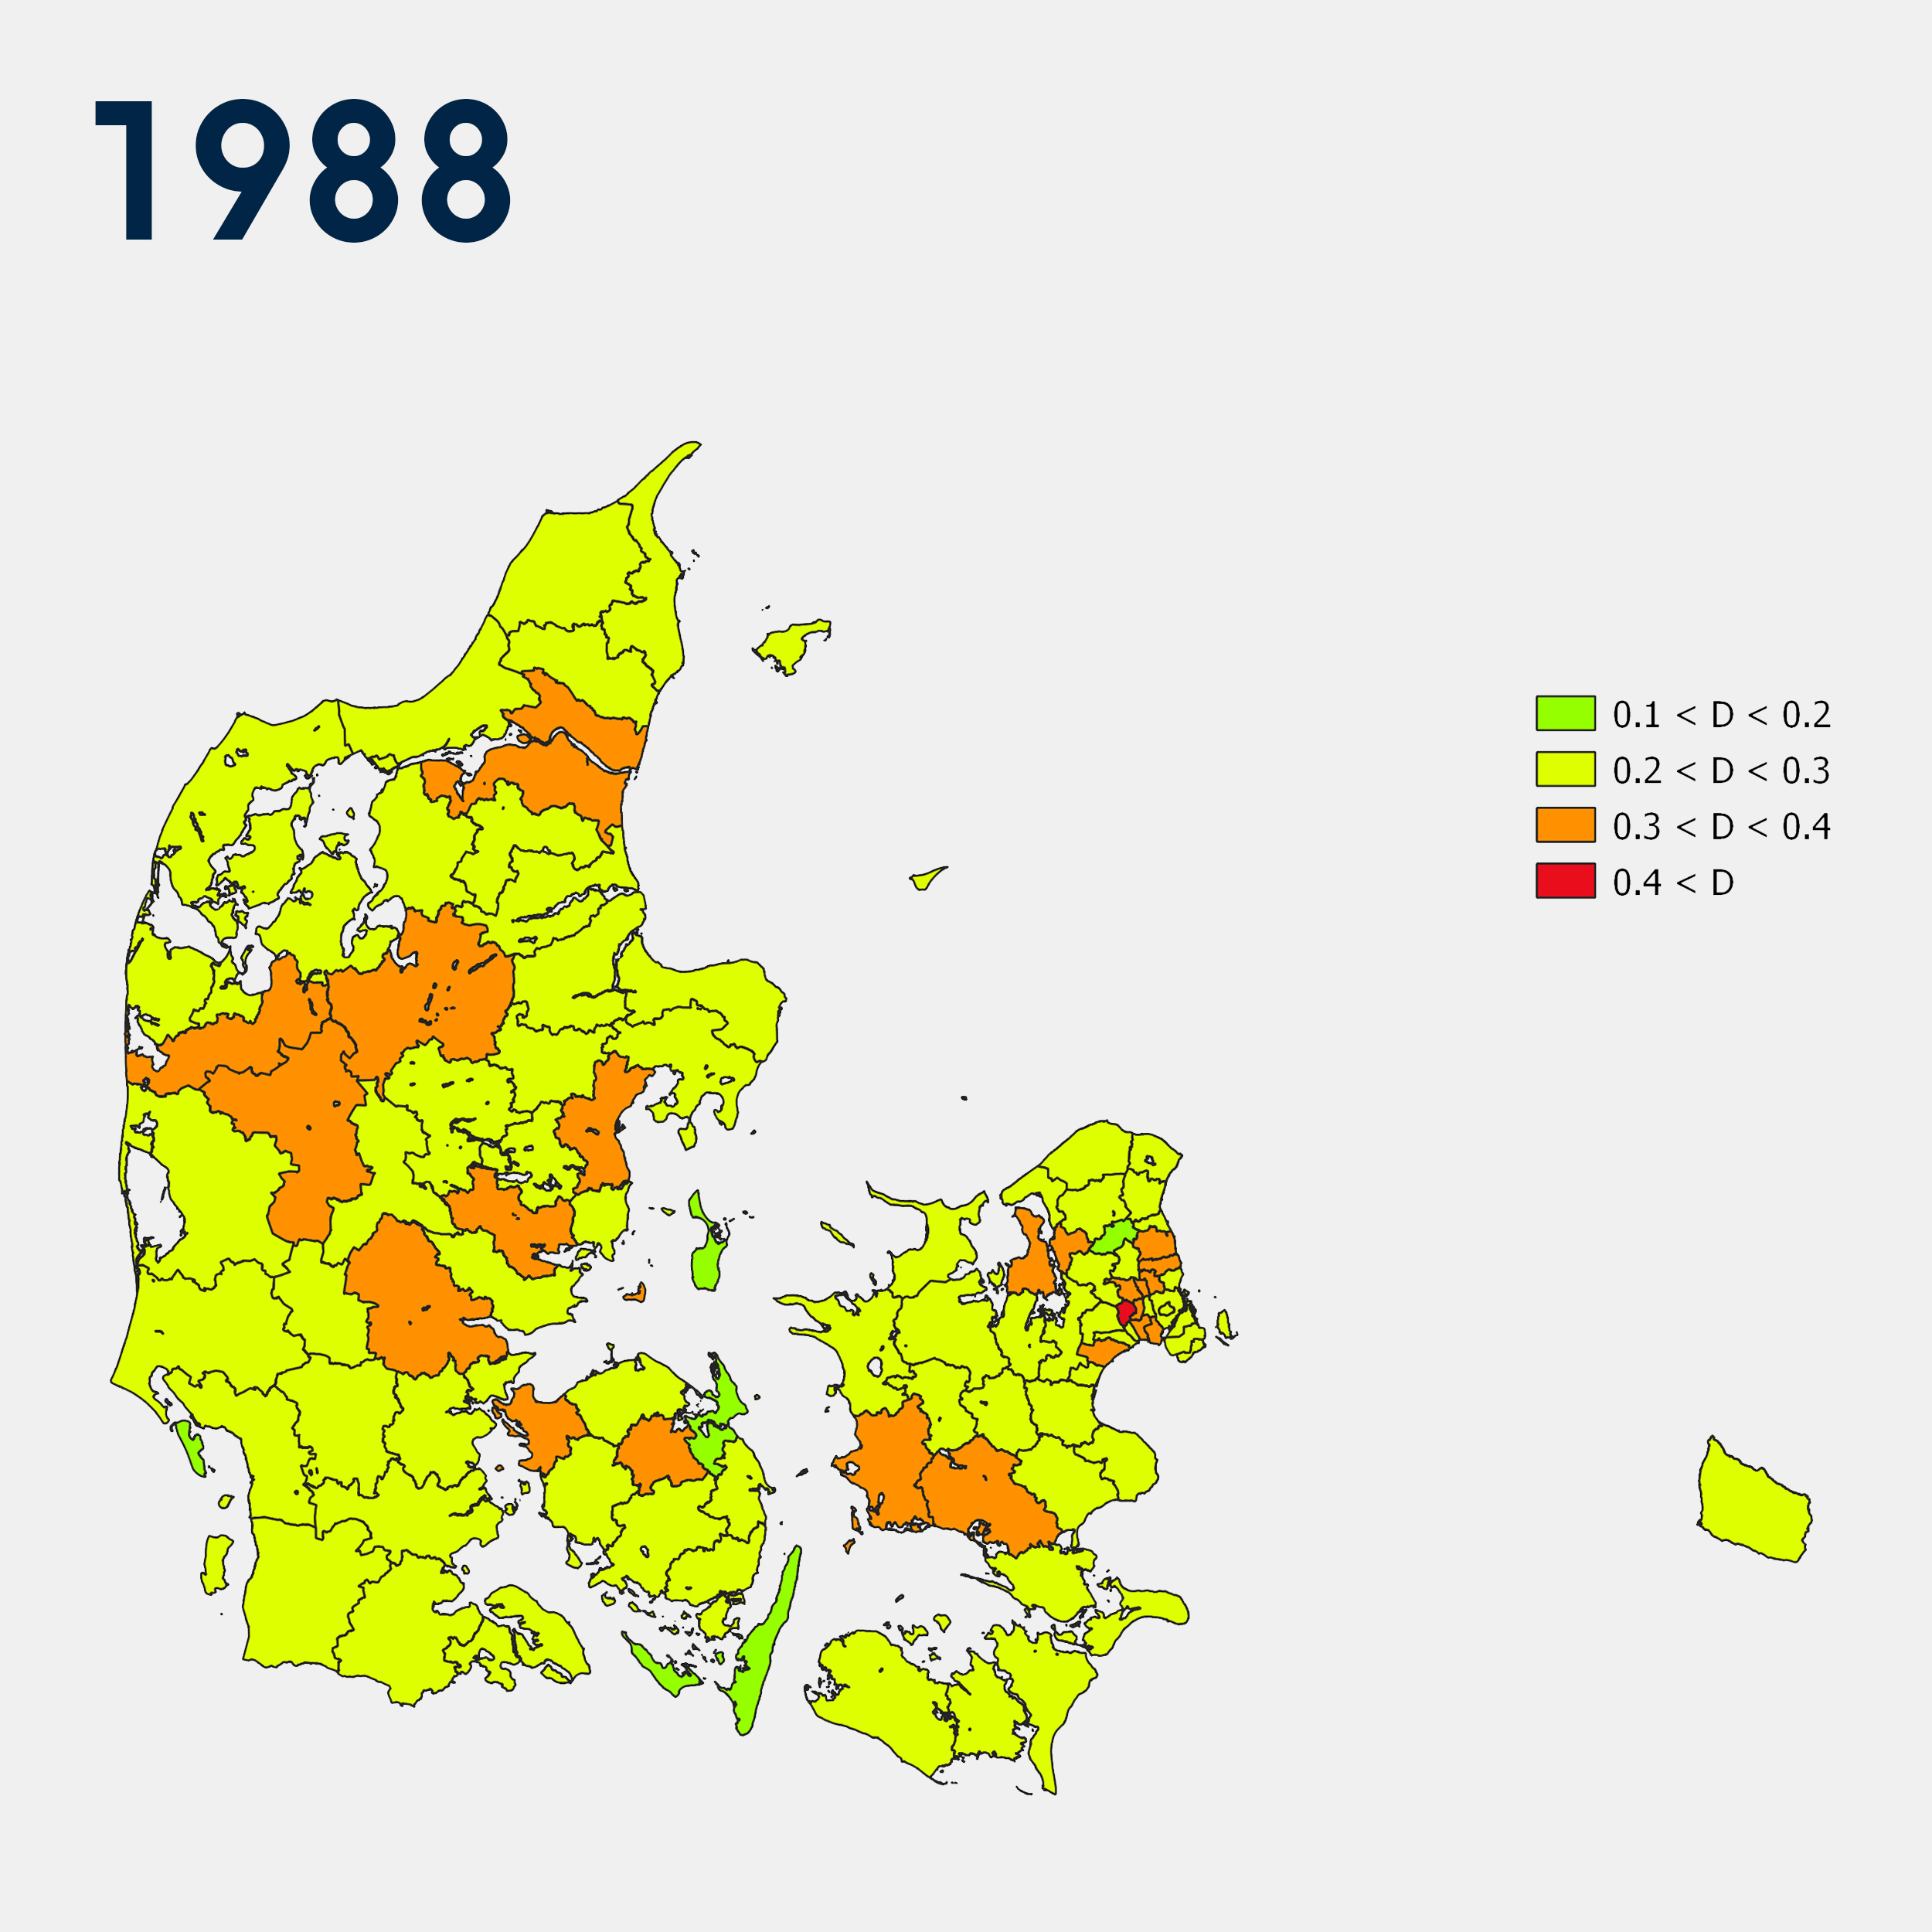 The maps show how segregated the lowest income households were living from other population groups in the Danish municipalities in 1988 and 2015.